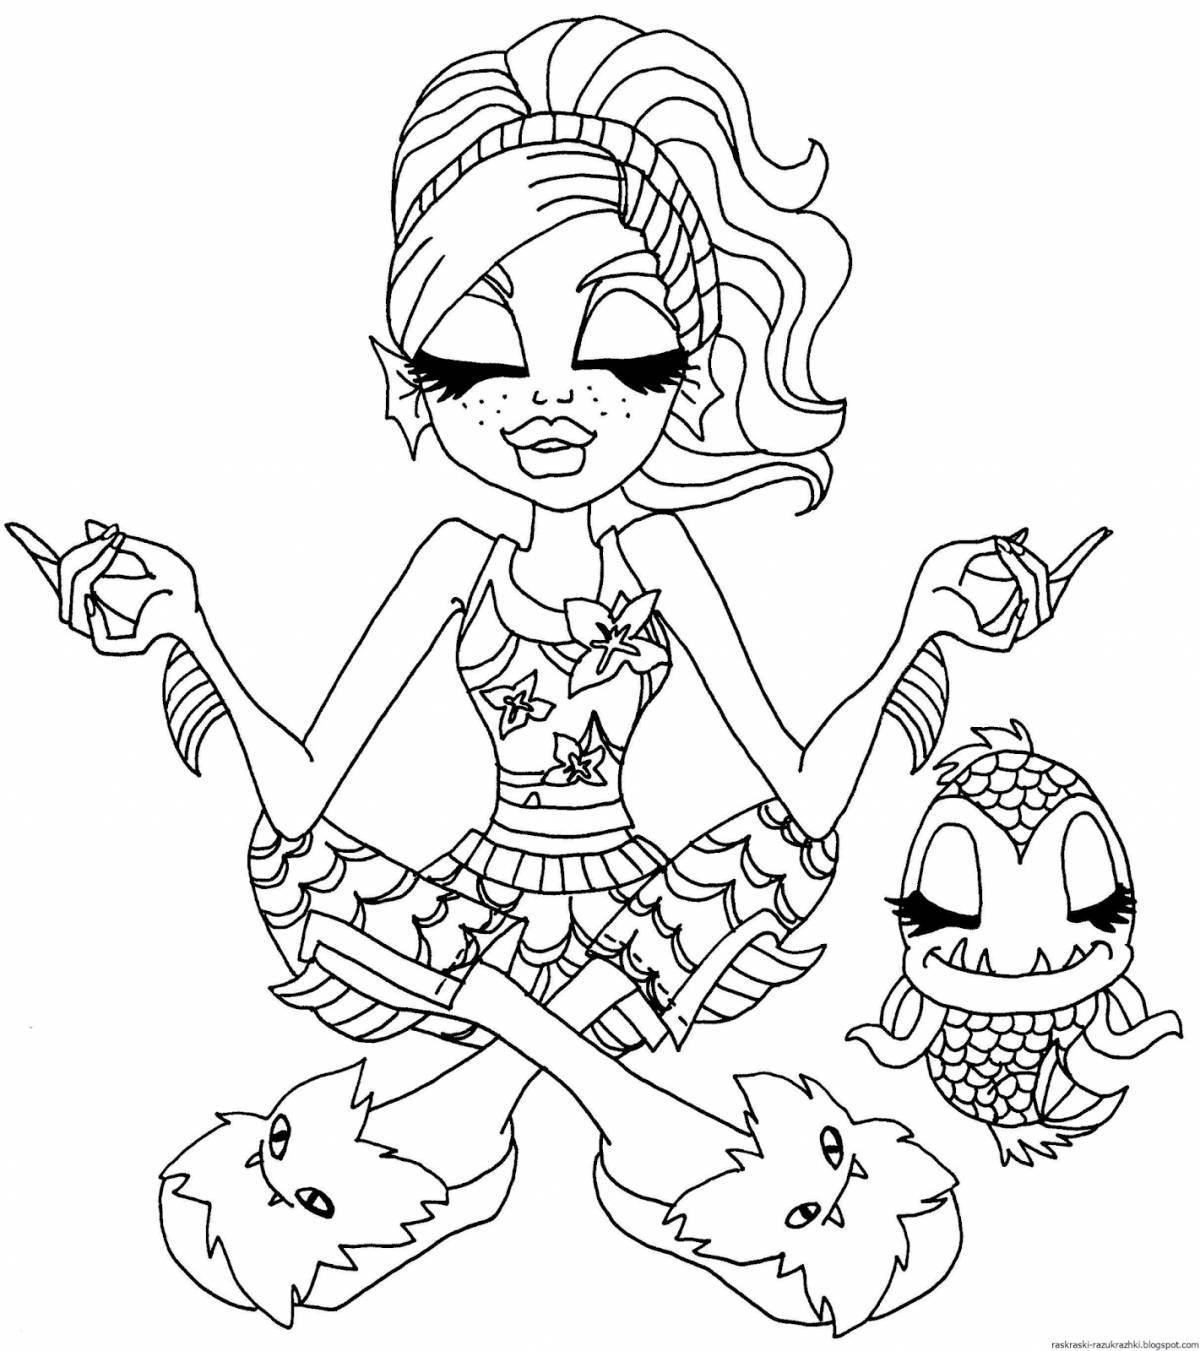 Monster high style coloring